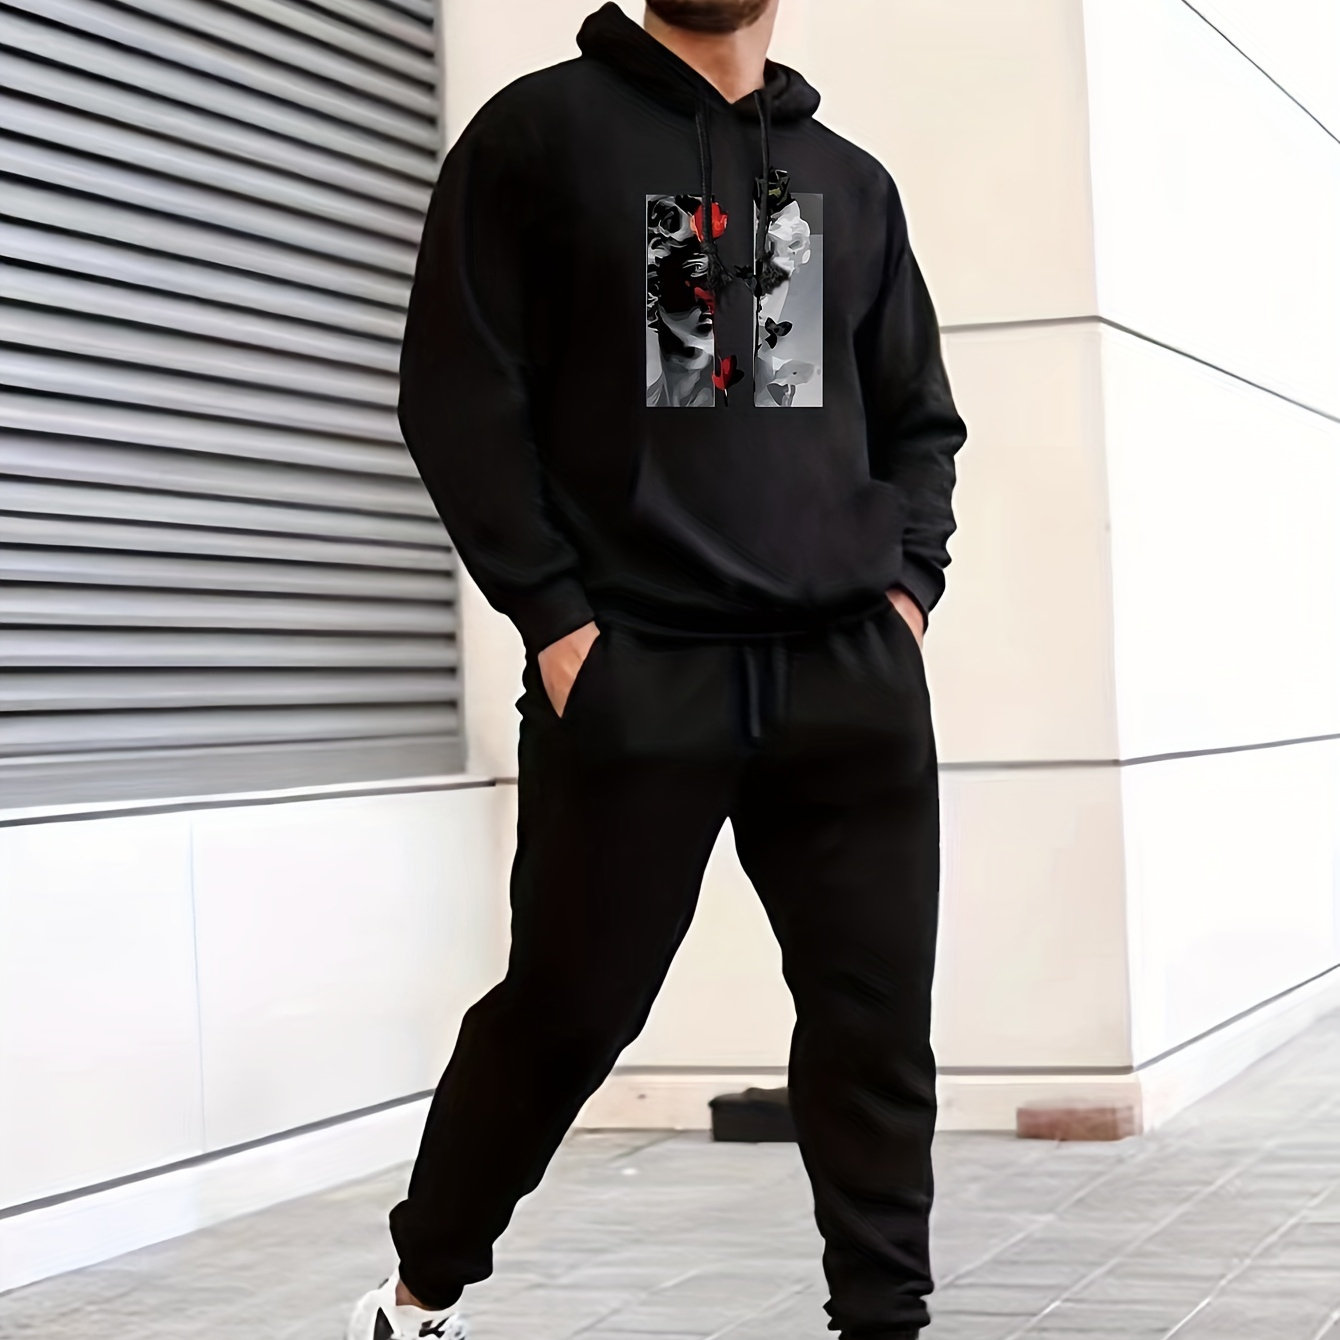 

Retro Statue Print, Men's 2pcs Outfits, Casual Hoodies Long Sleeve Pullover Hooded Sweatshirt And Sweatpants Joggers Set For Spring Fall, Men's Clothing